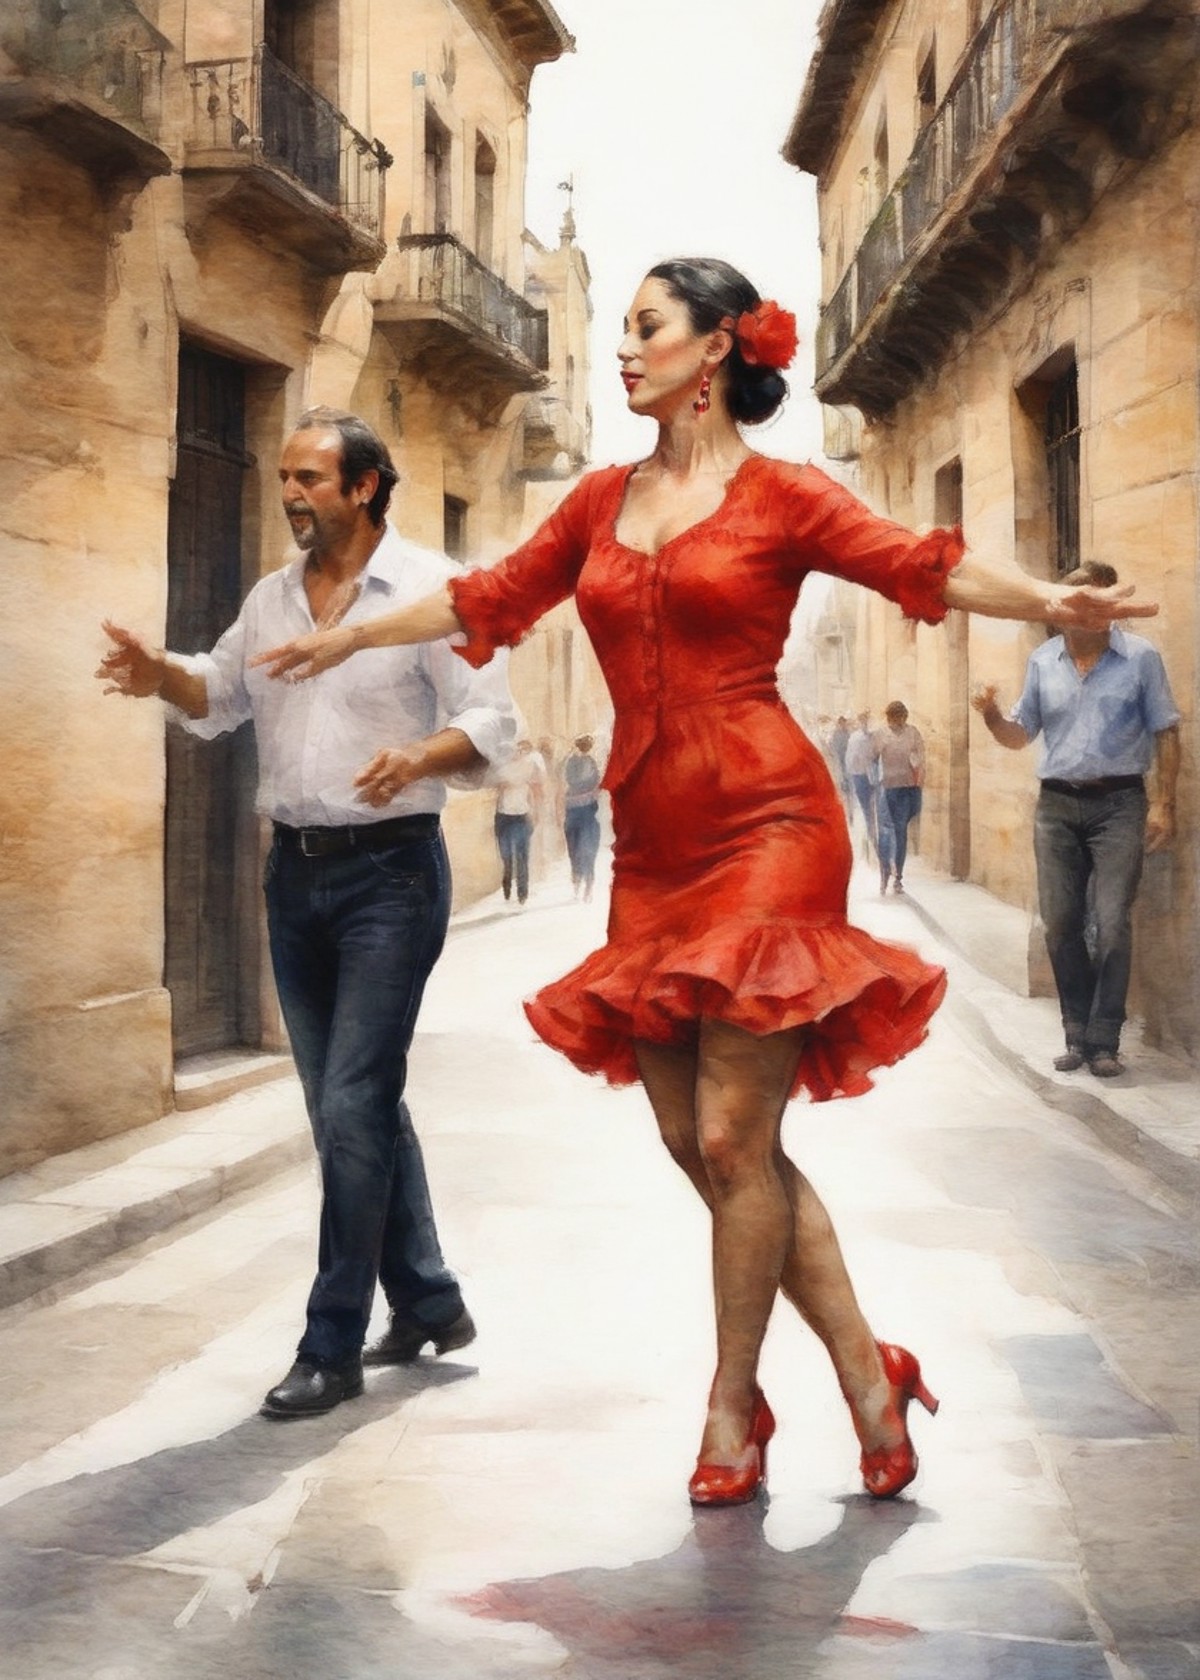 A lively flamenco dance in the streets of Seville with the sound of castanets and the stomp of heels